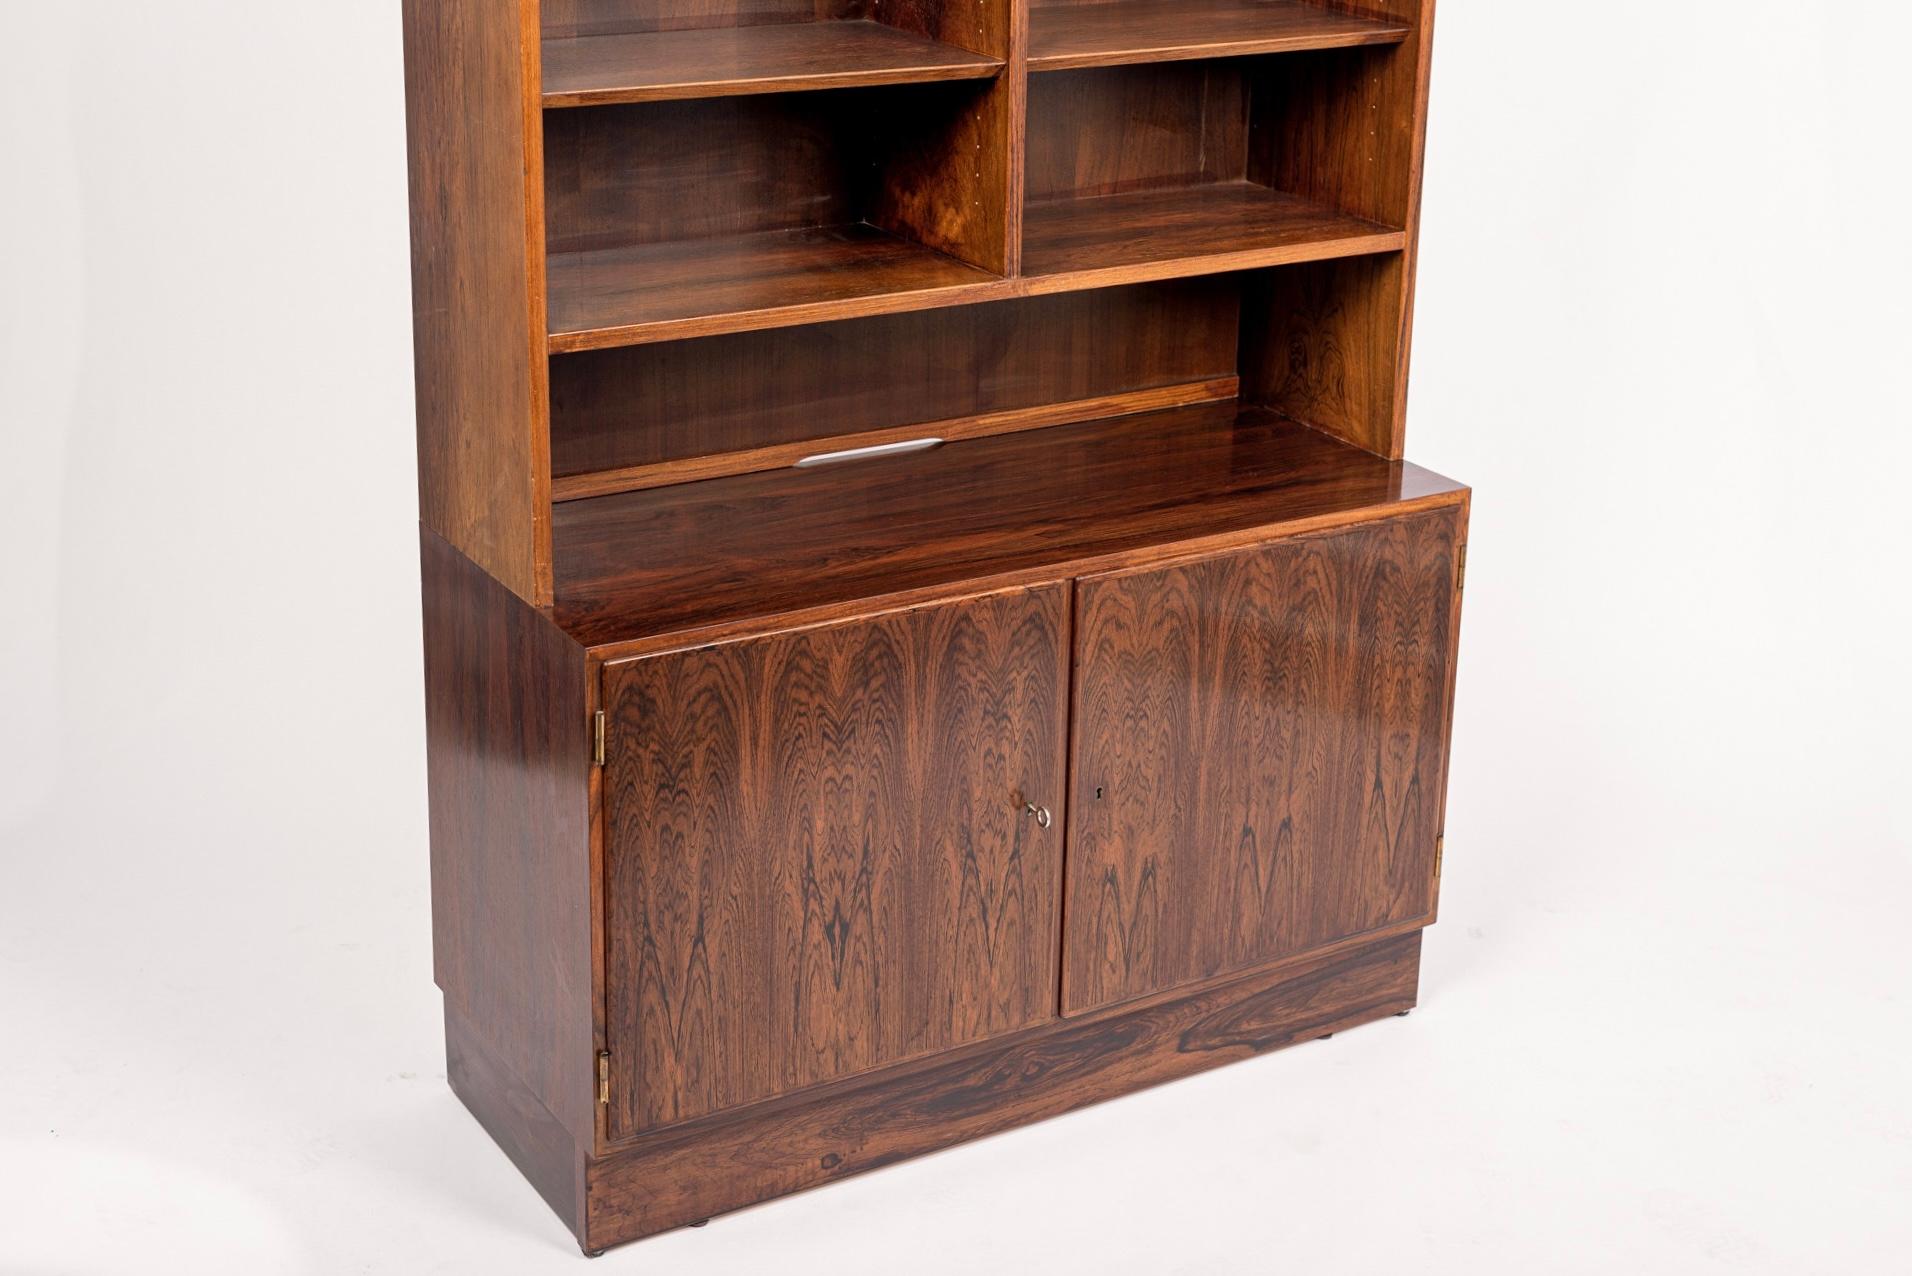 Midcentury Danish Rosewood Bookcase by Carlo Jensen for Hundevad In Good Condition For Sale In Detroit, MI